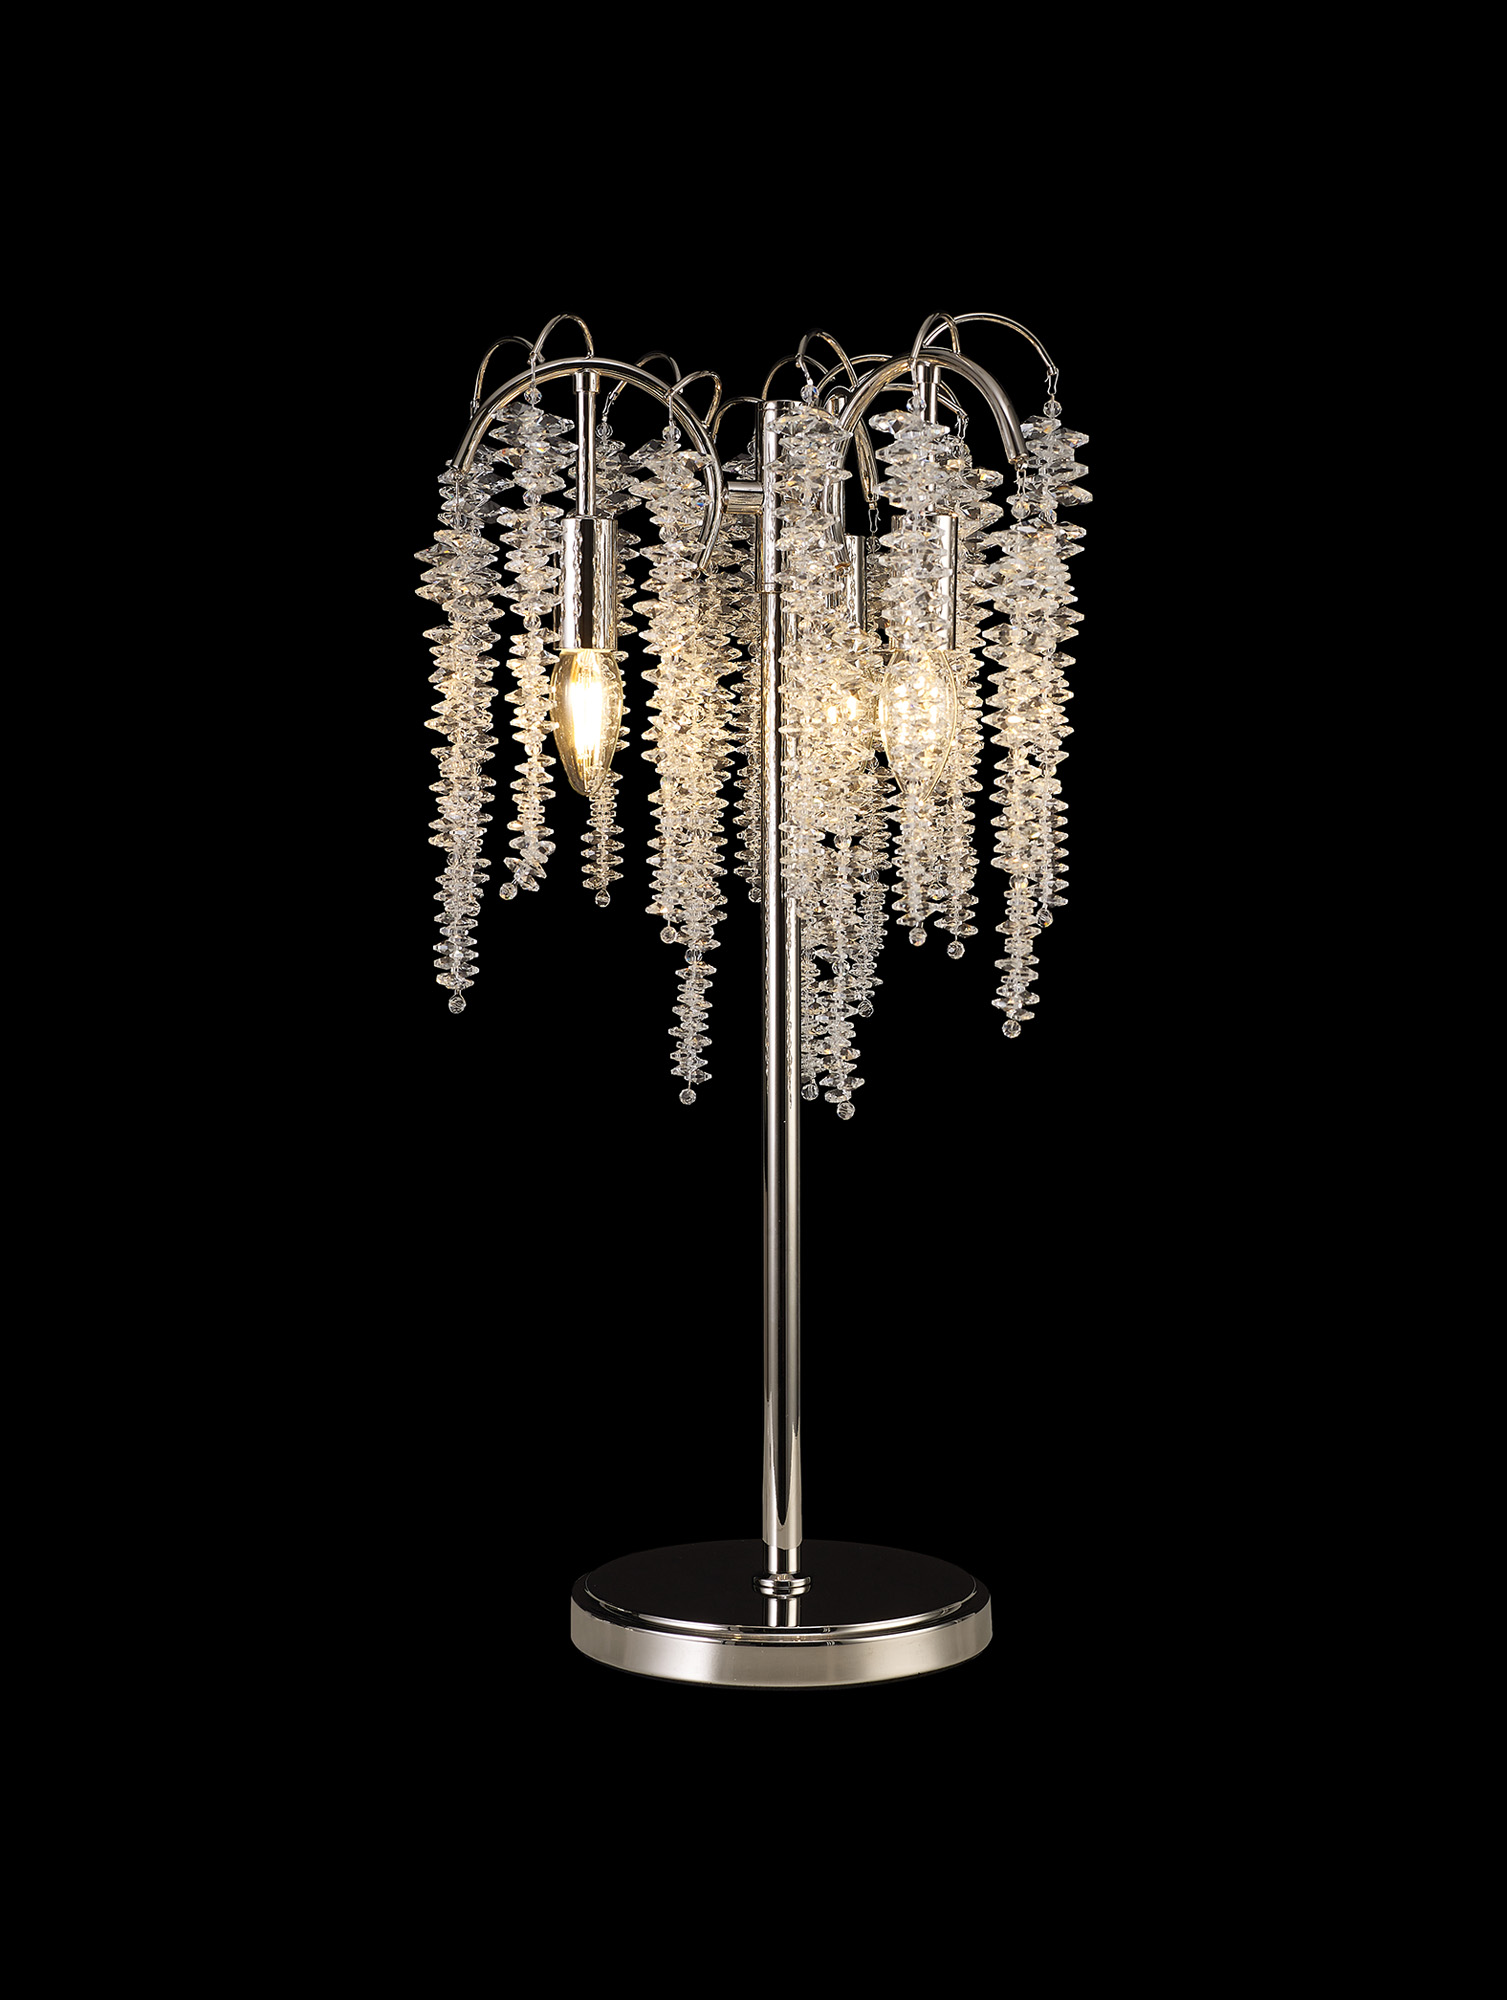 Wisteria Polished Nickel Crystal Table Lamps Diyas Designer Table Lamps